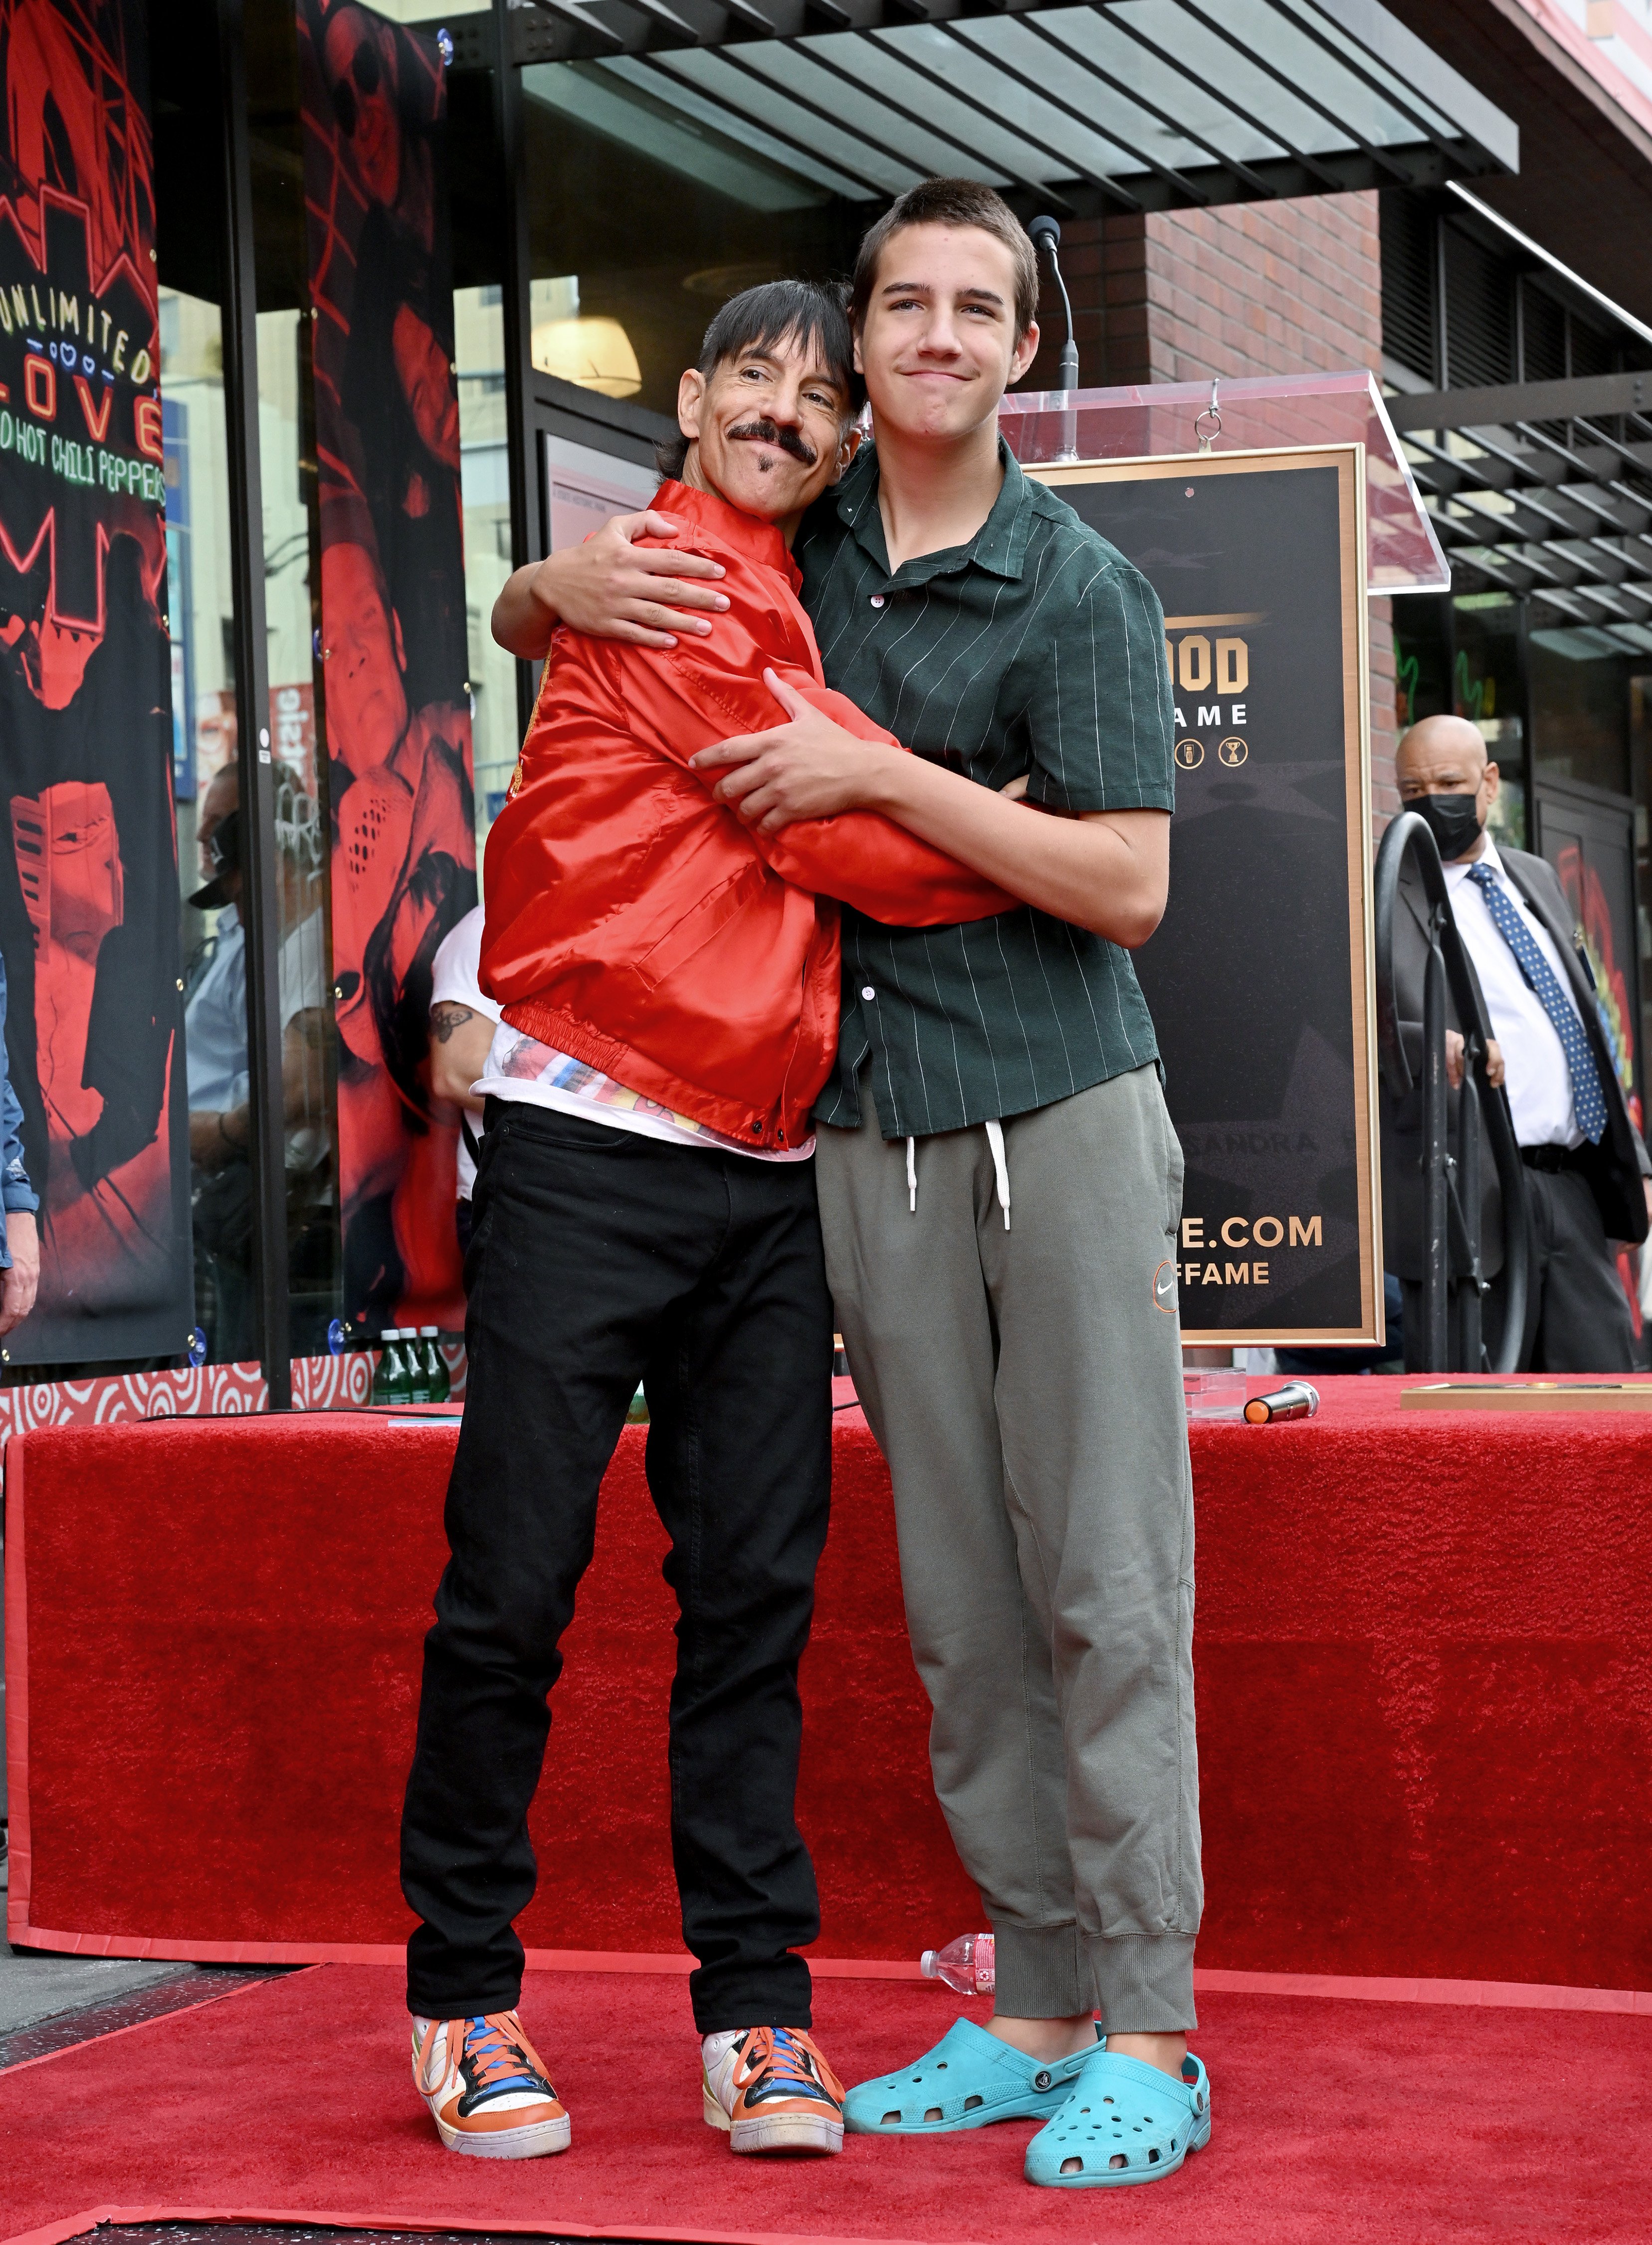 Anthony Kiedis and Everly Bear Kiedis at the ceremony honoring Red Hot Chili Peppers with a star on the Hollywood Walk of Fame on March 31, 2022 in Hollywood, California. | Source: Getty Images